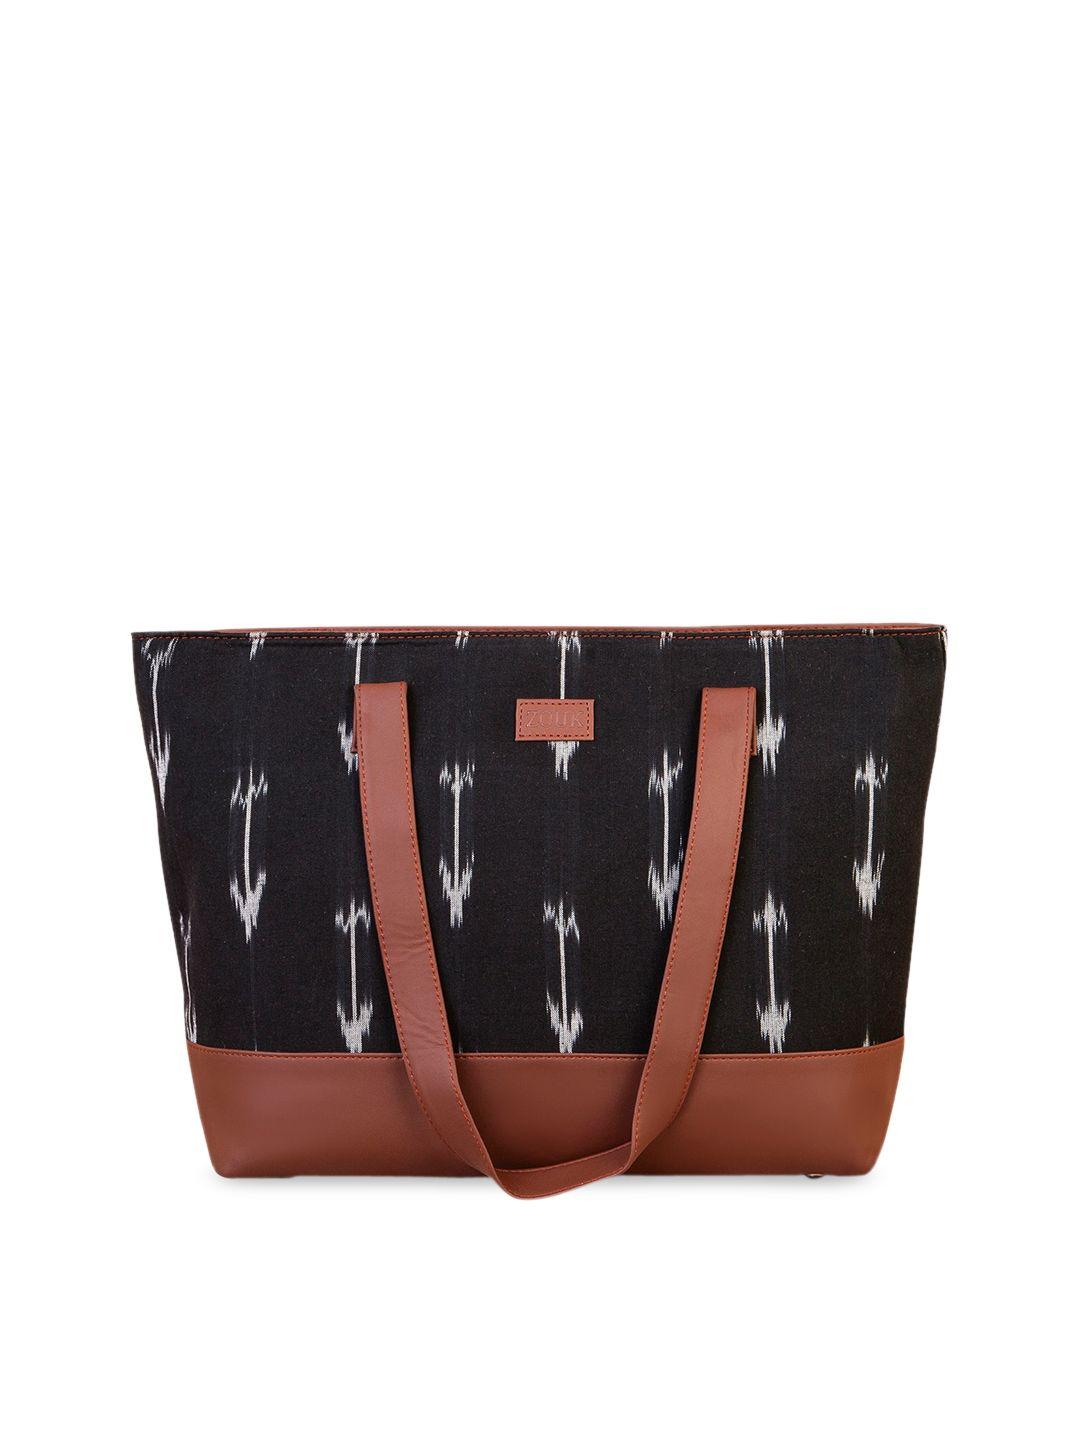 ZOUK Black Printed Shopper Tote Bag with Tasselled